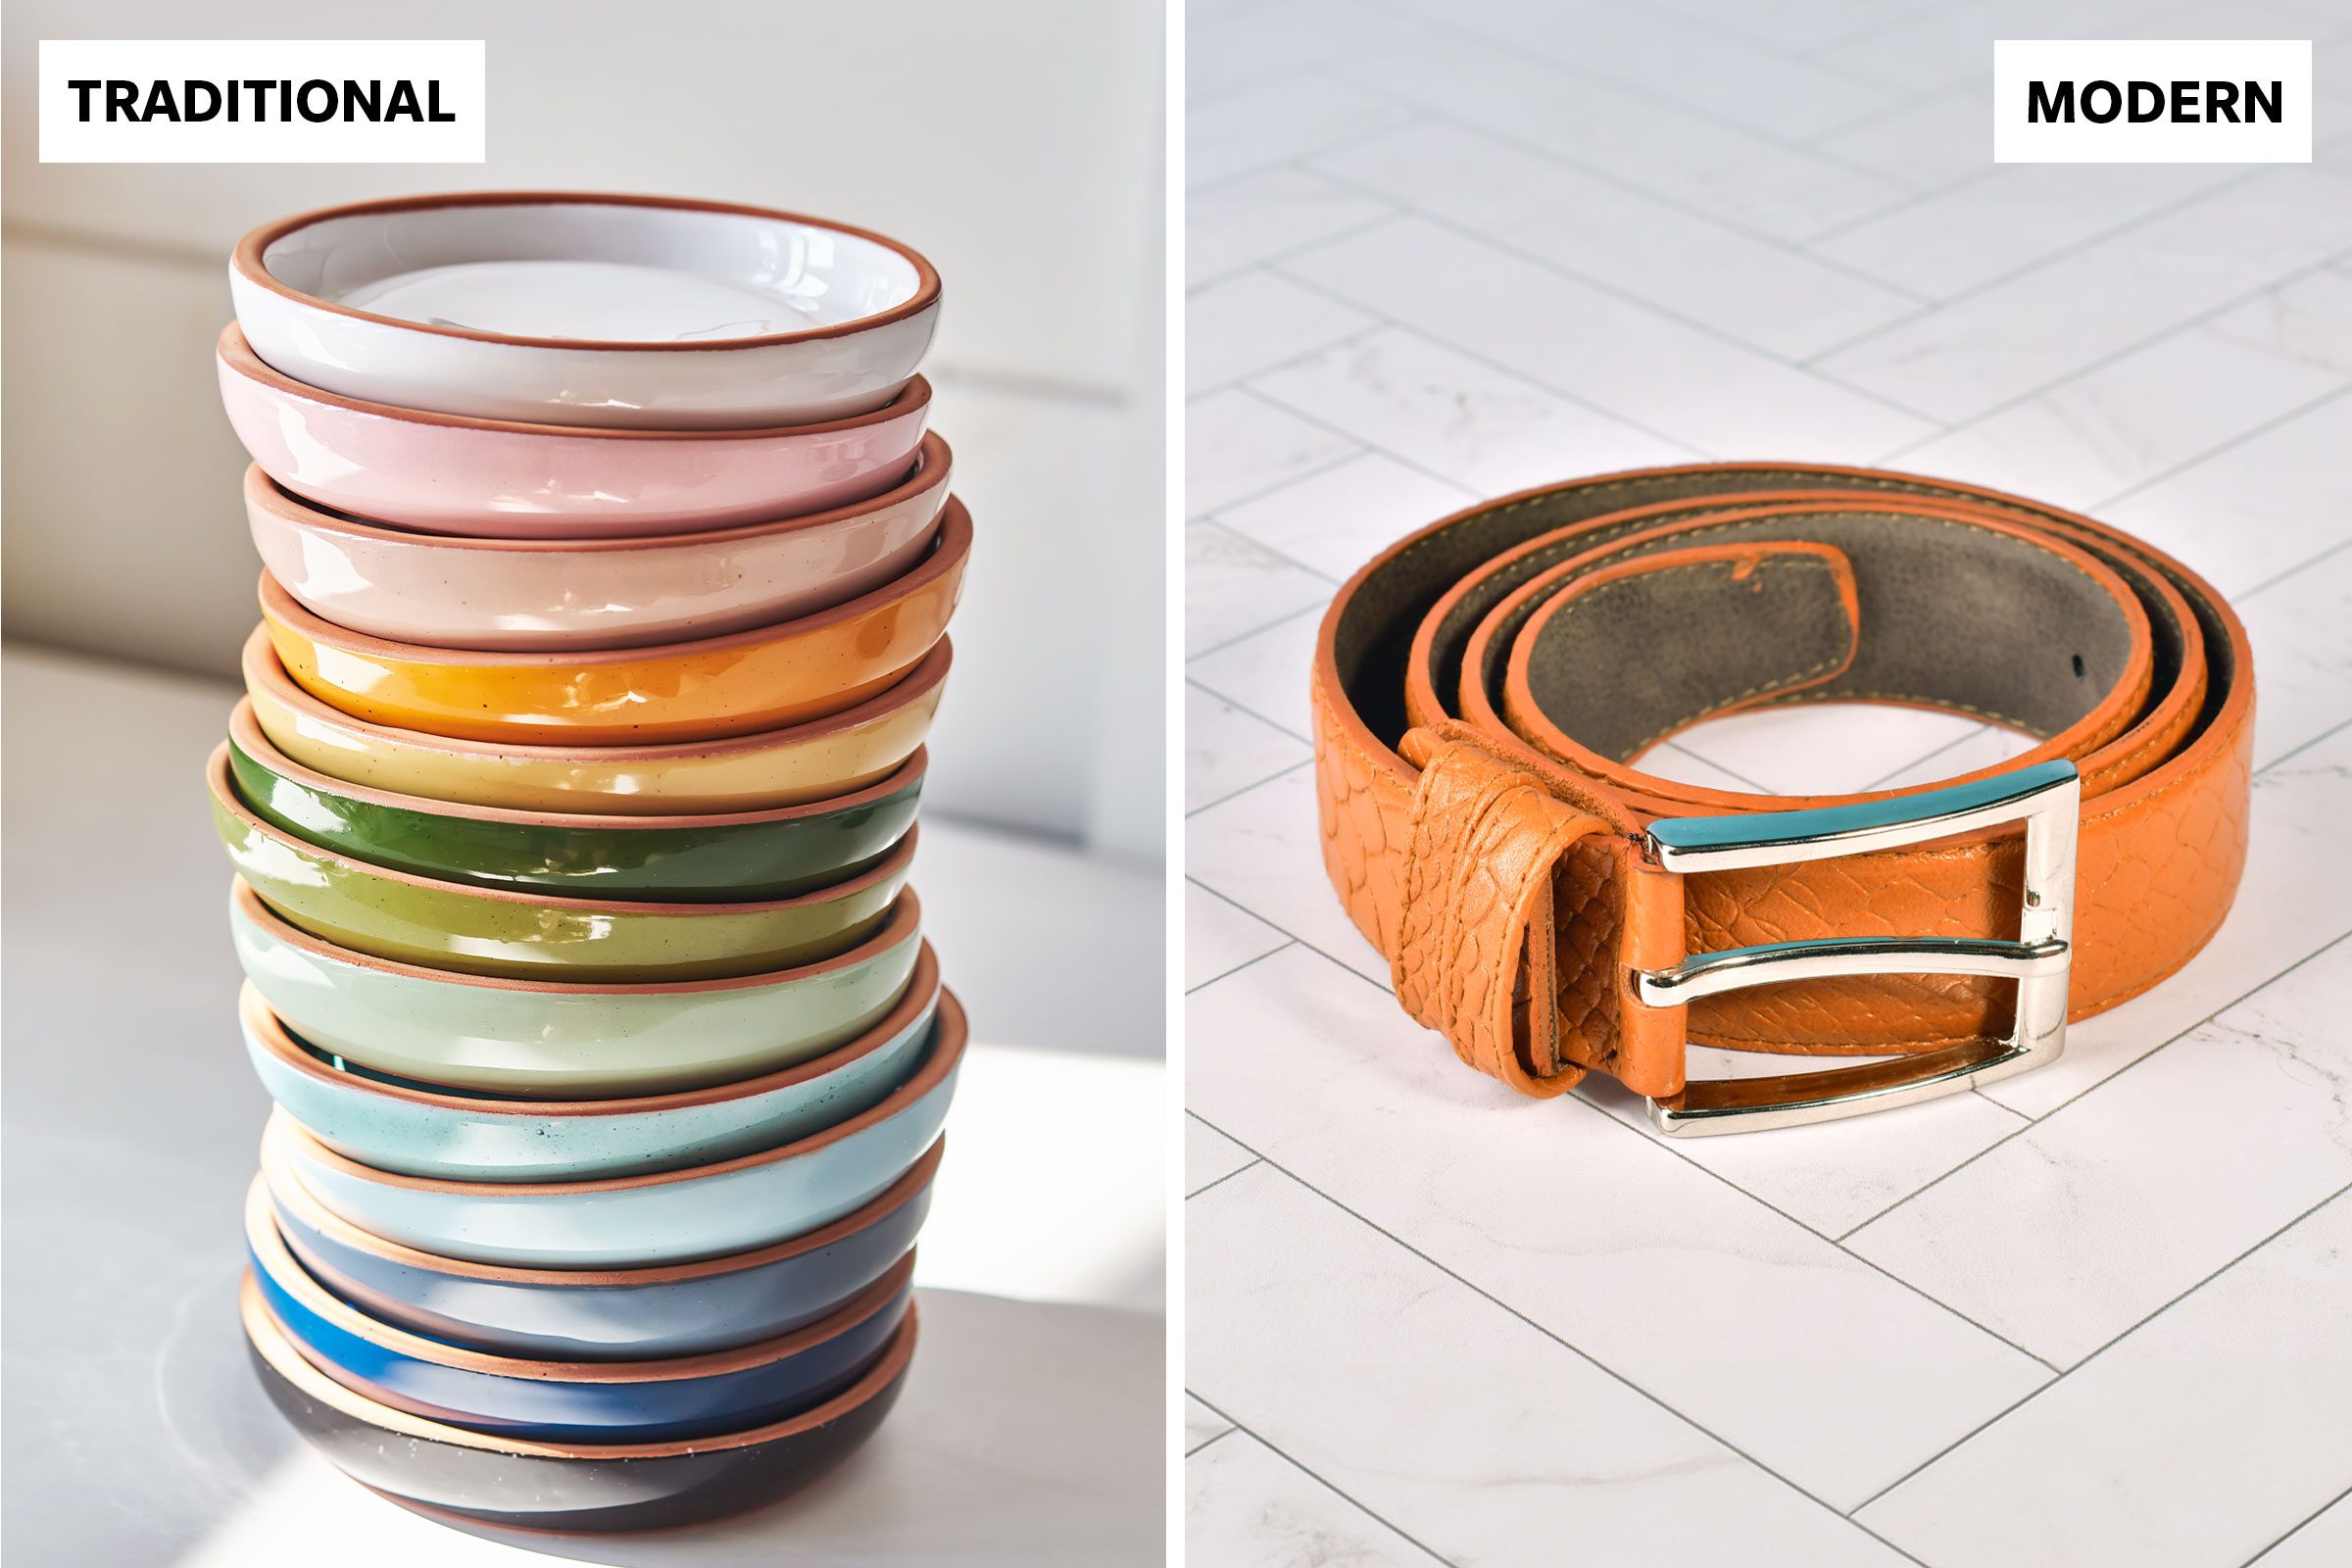 stack of rainbow pottery and a leather belt